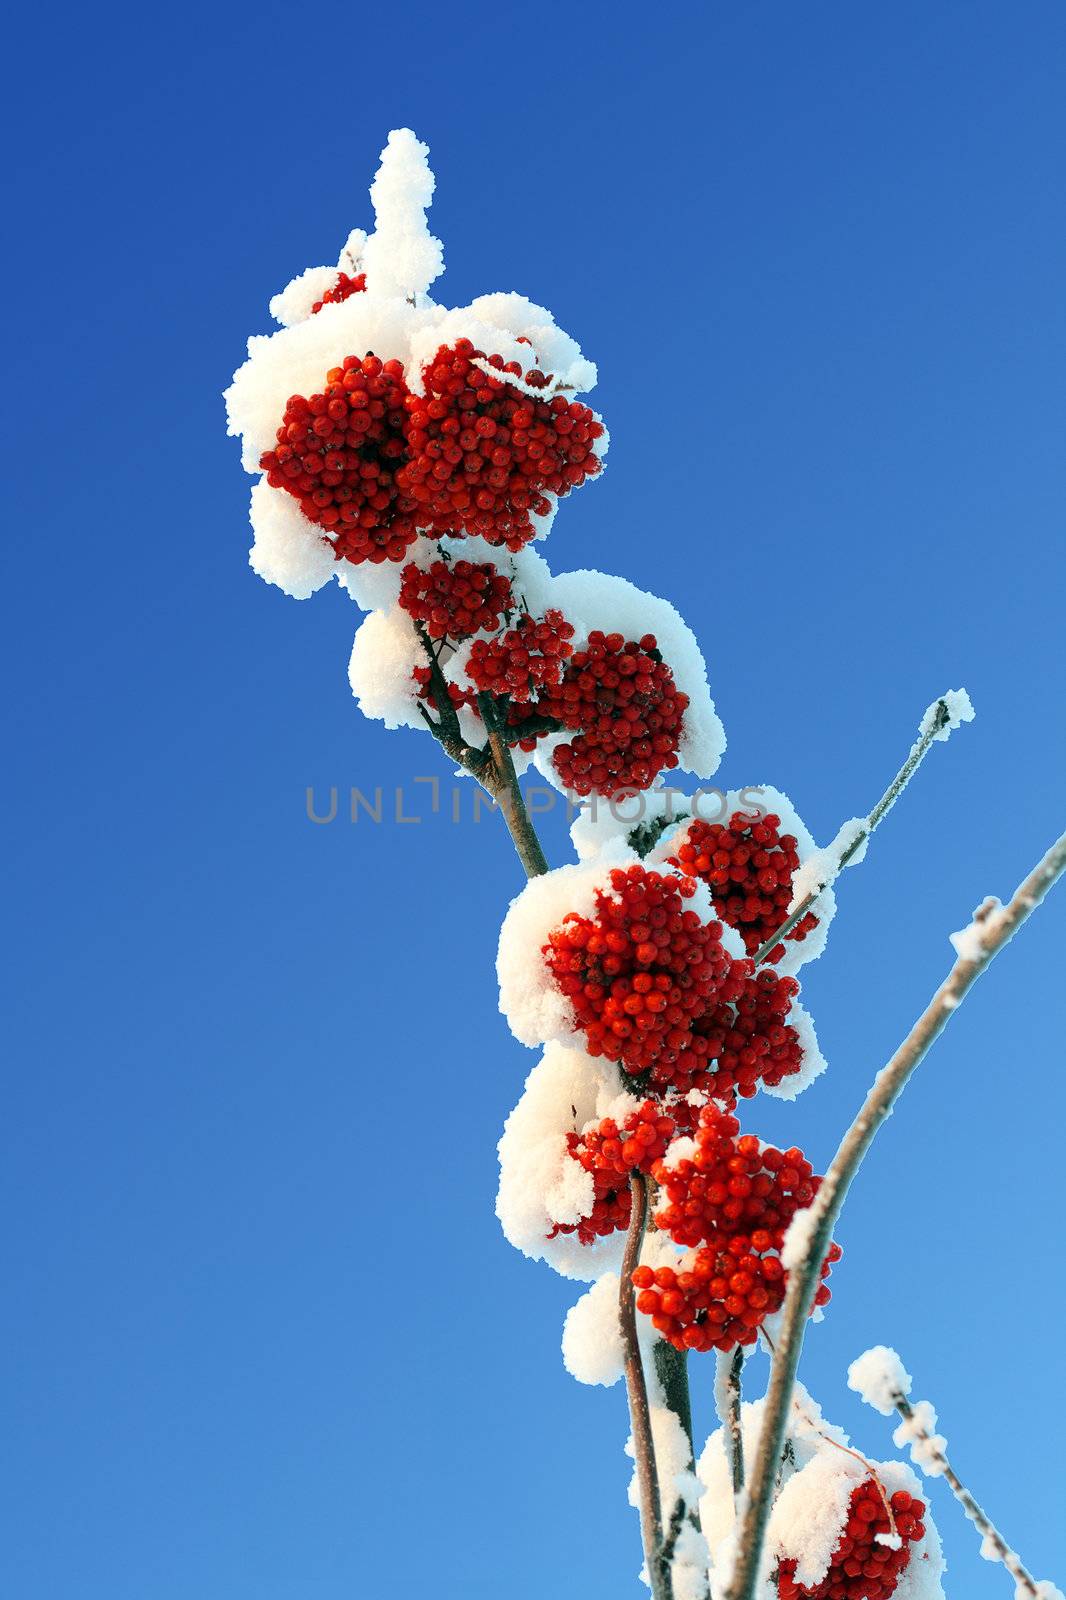 ash-berry red branches under snow by Mikko